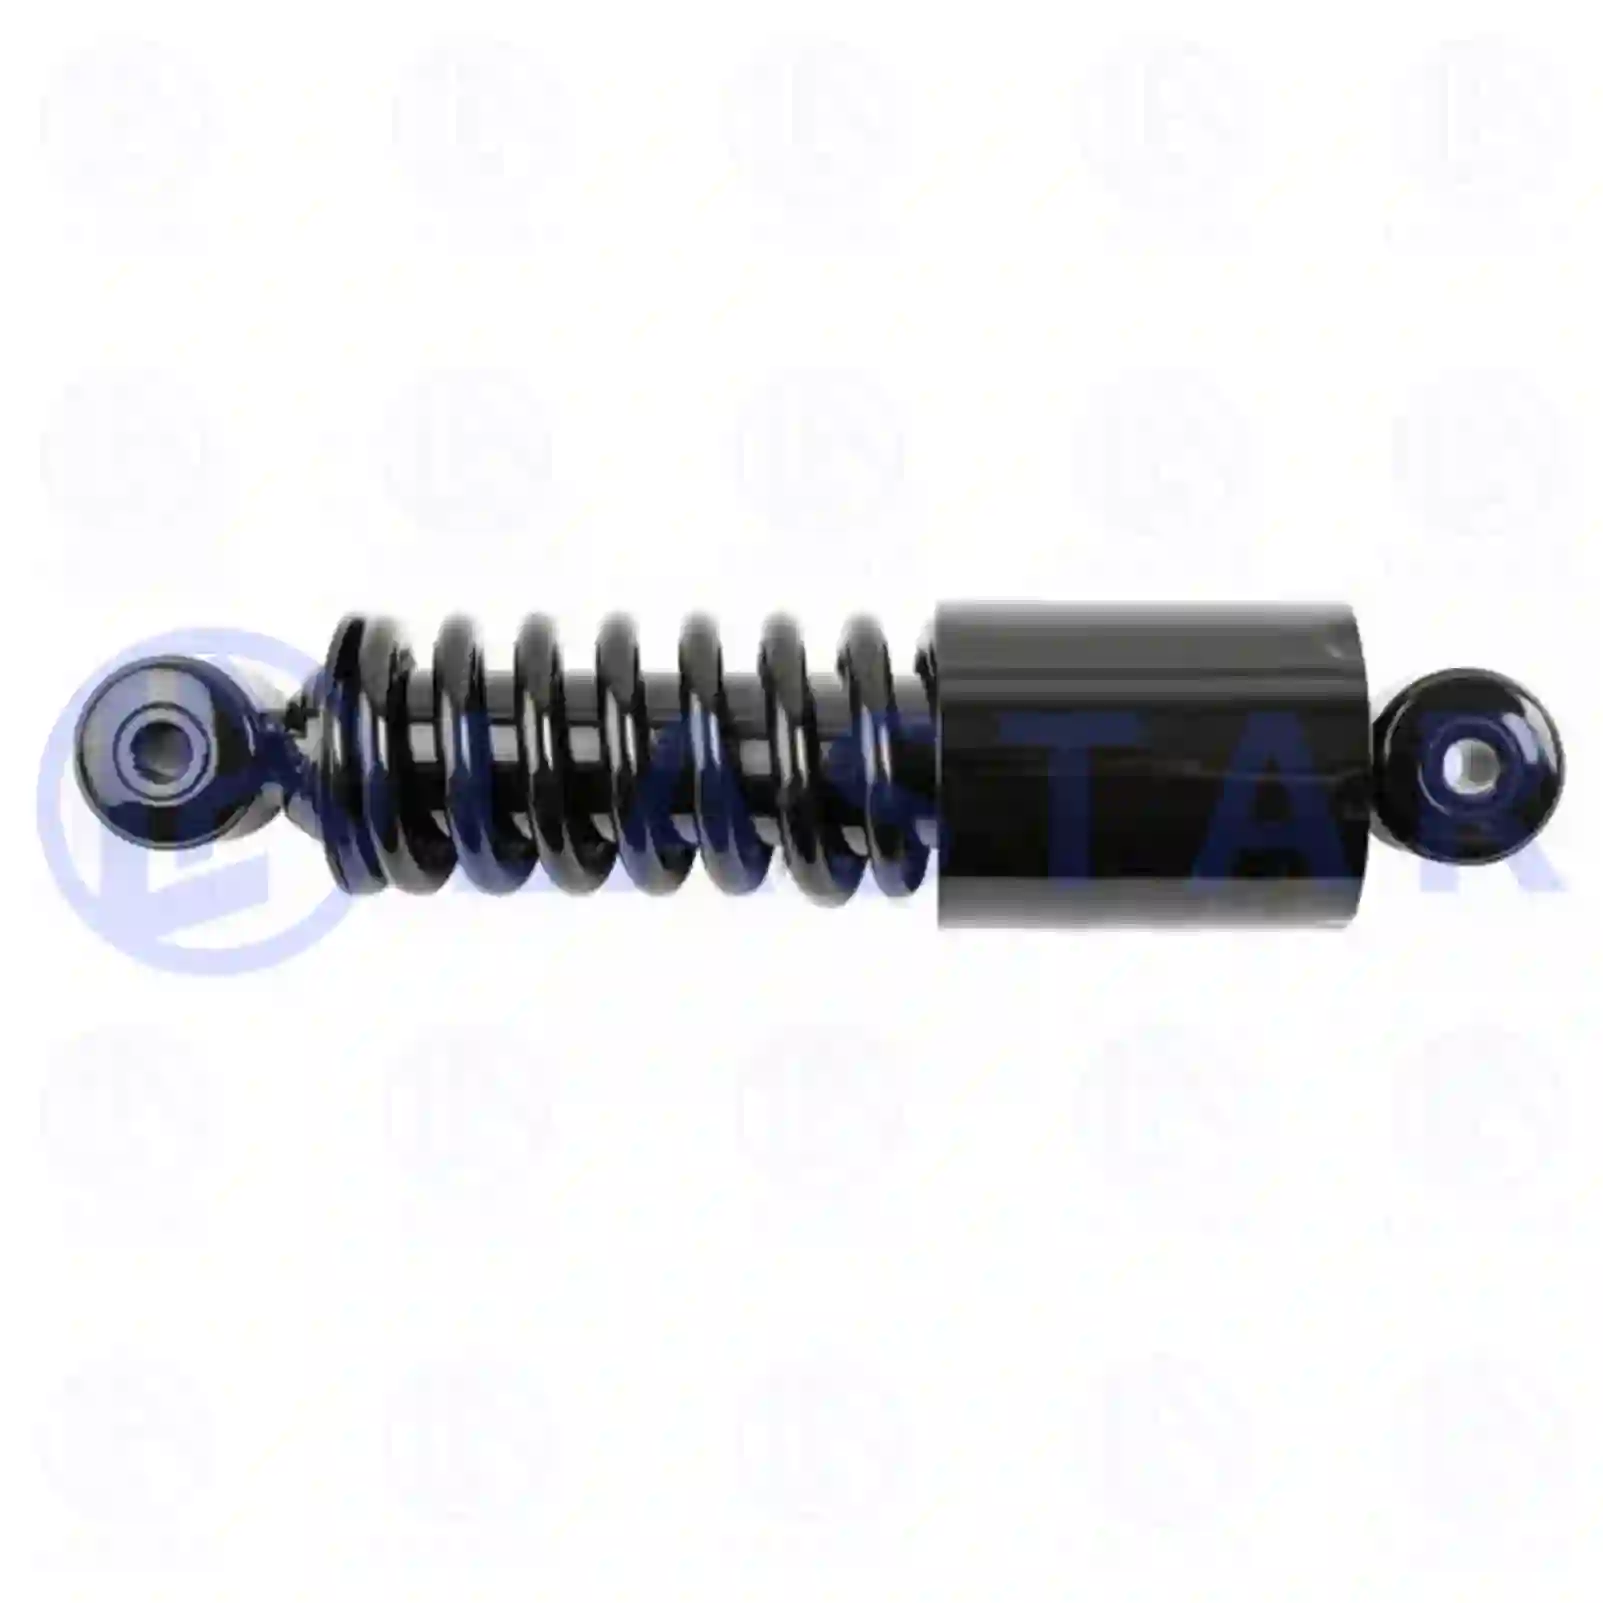 Cabin shock absorber, 77734901, 9438903519, , , ||  77734901 Lastar Spare Part | Truck Spare Parts, Auotomotive Spare Parts Cabin shock absorber, 77734901, 9438903519, , , ||  77734901 Lastar Spare Part | Truck Spare Parts, Auotomotive Spare Parts